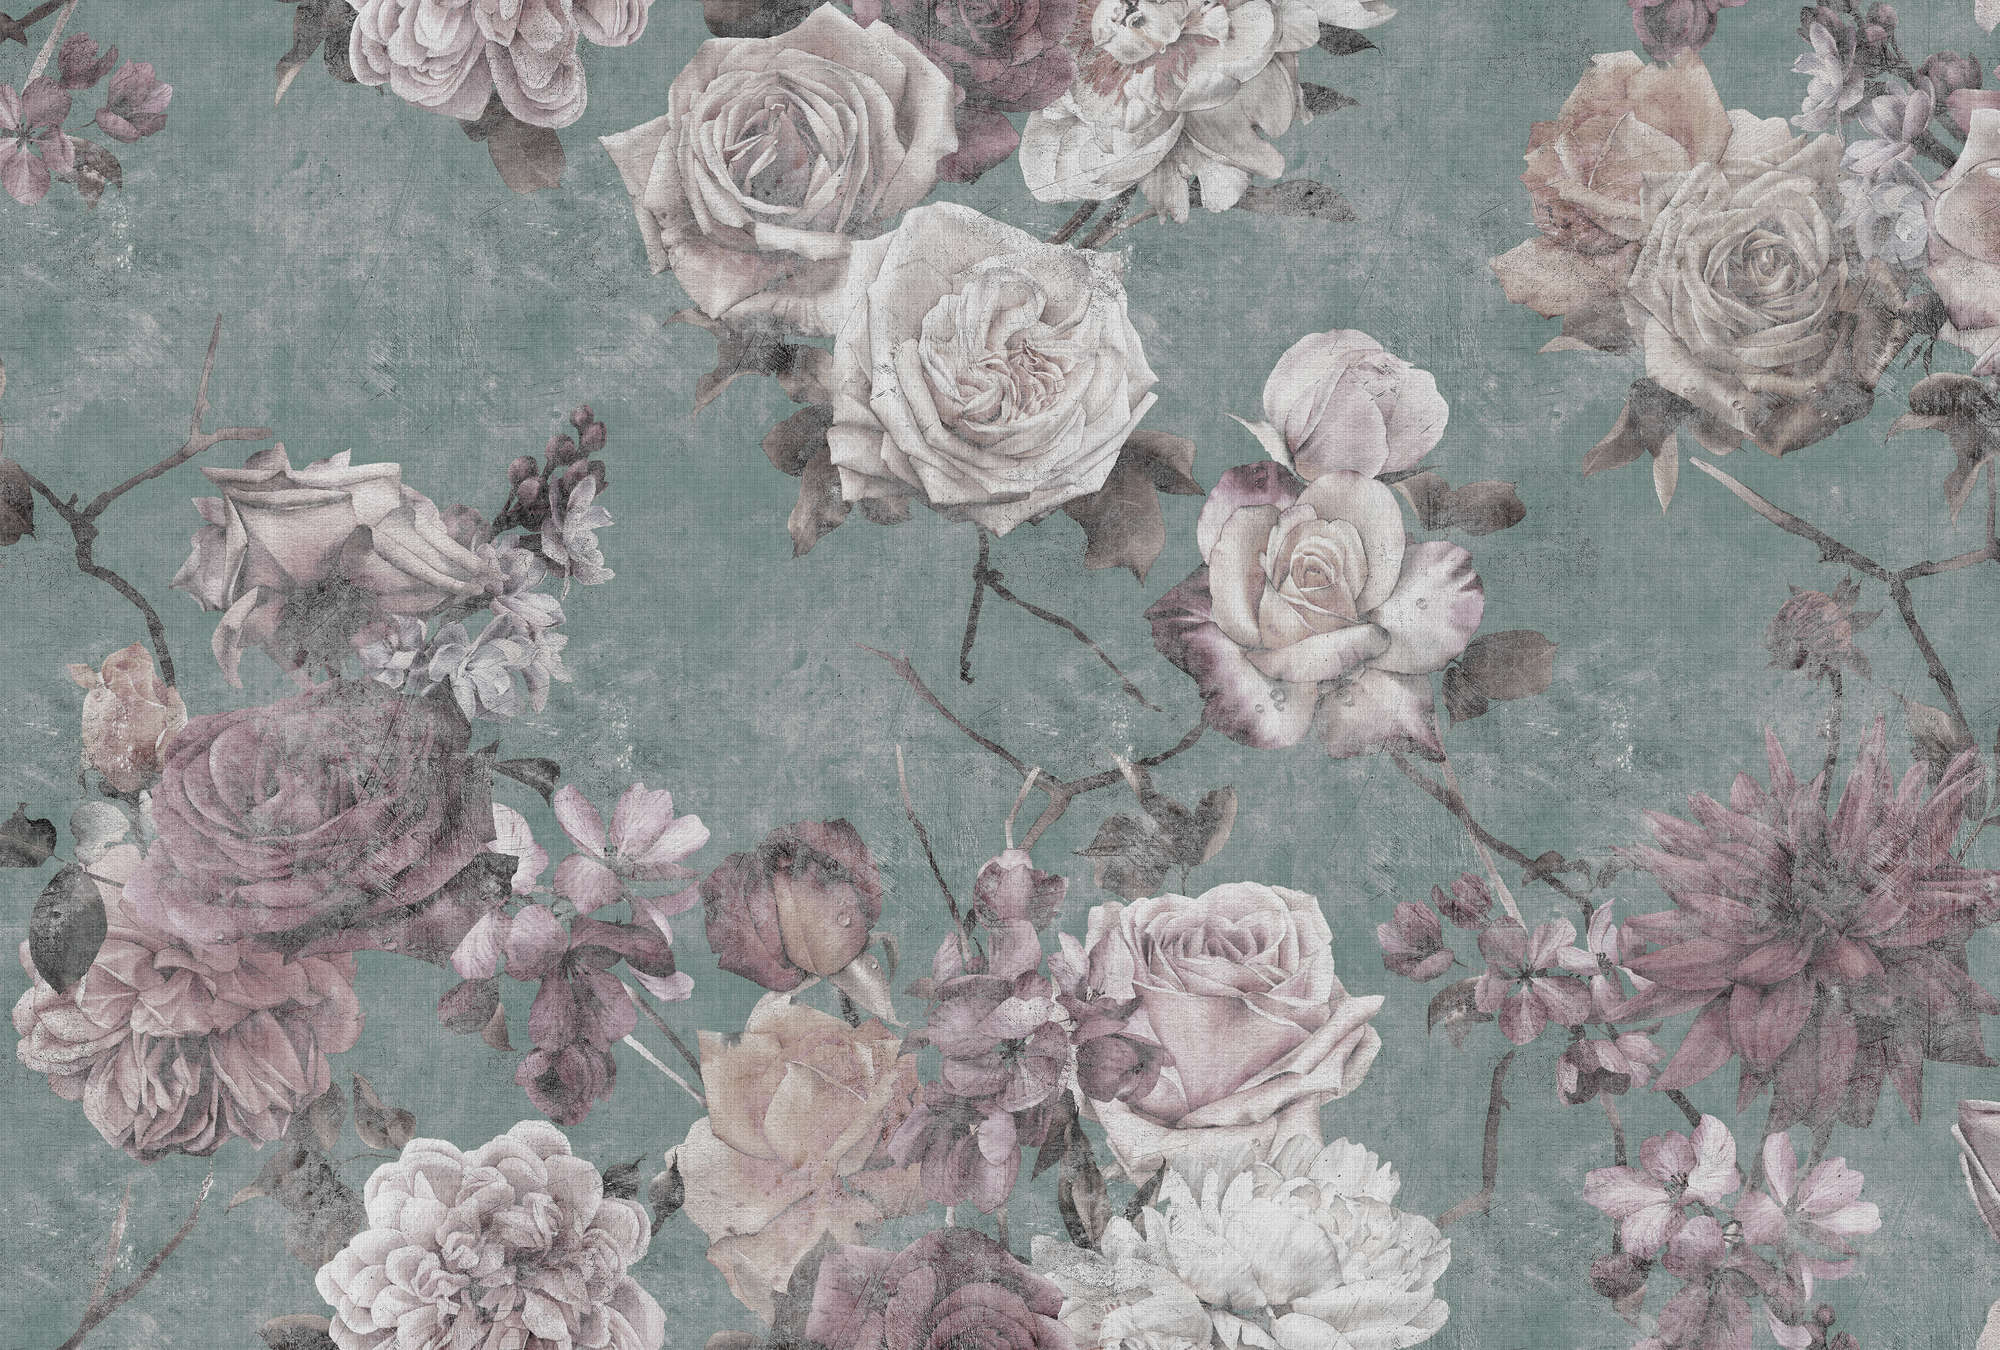             Sleeping Beauty 2 - Vintage Style Rose Blossoms Wallpaper - Natural Linen Texture - Pink, Turquoise | Premium Smooth Vliesbehang
        